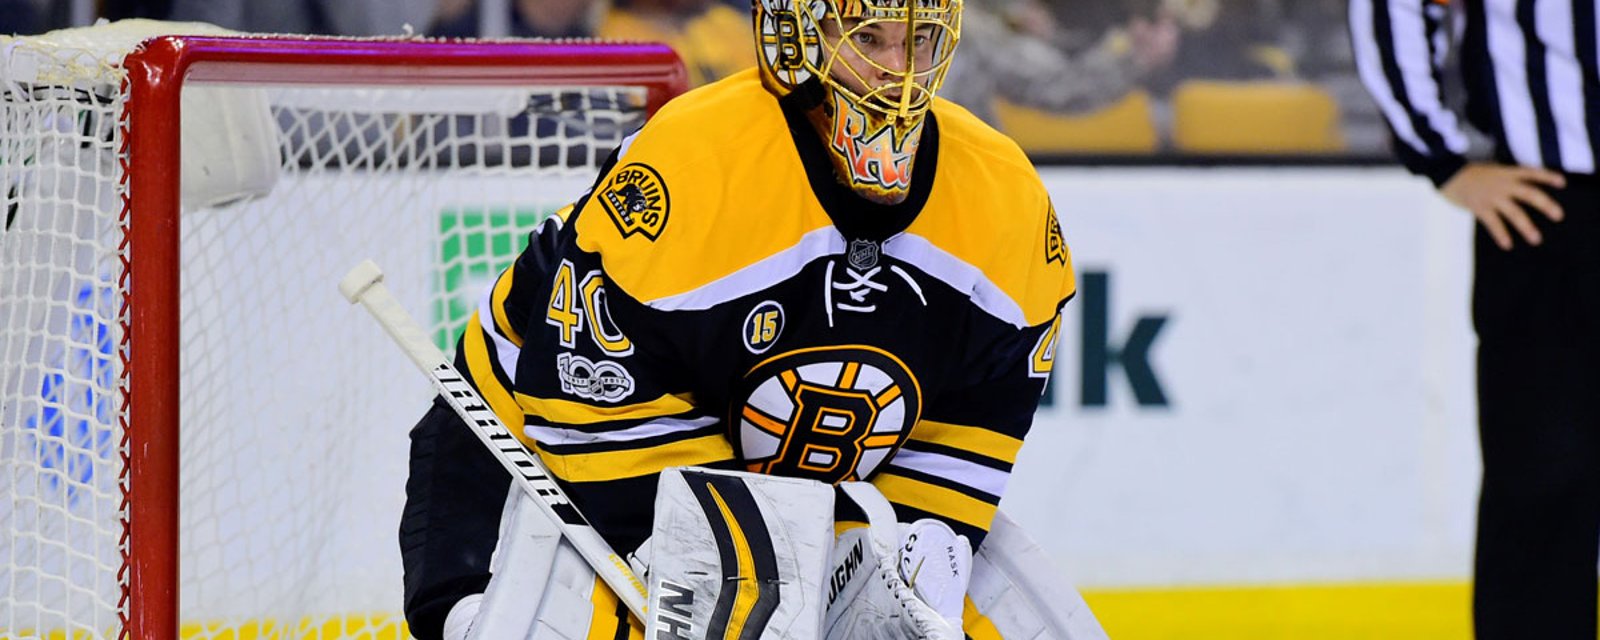 Must See: Bruins’ Rask splits the uprights during Patriots practice